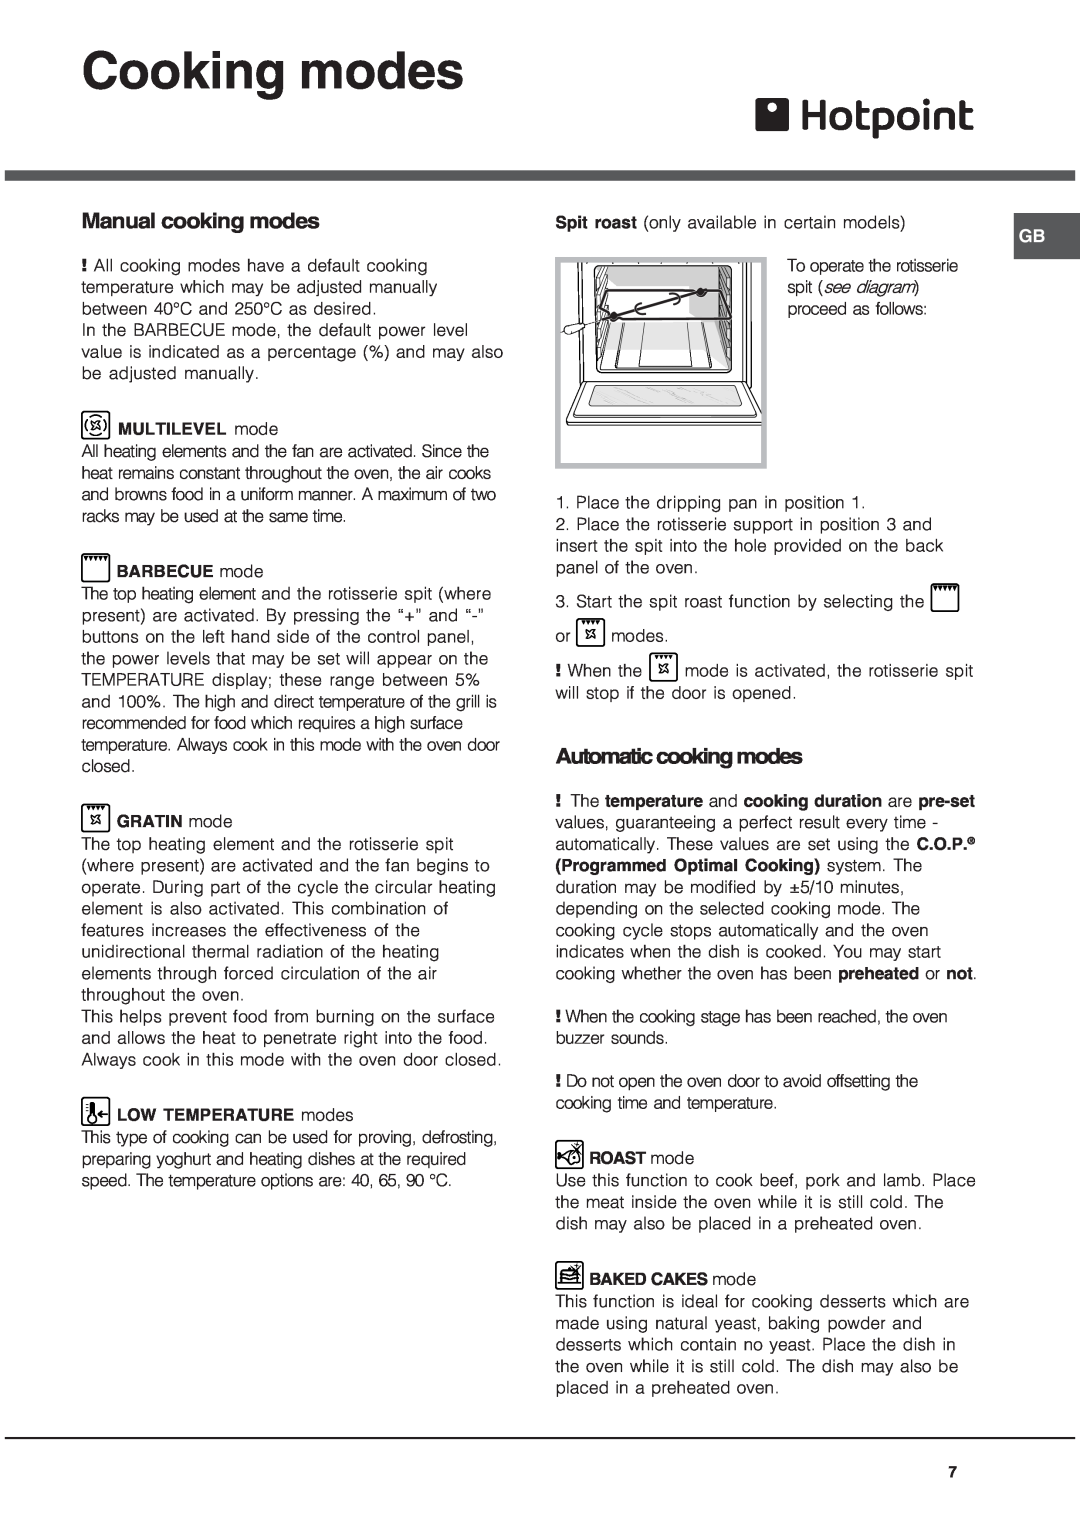 Hotpoint SE101PX manual Cooking modes, Manual cooking modes, Automatic cooking modes 